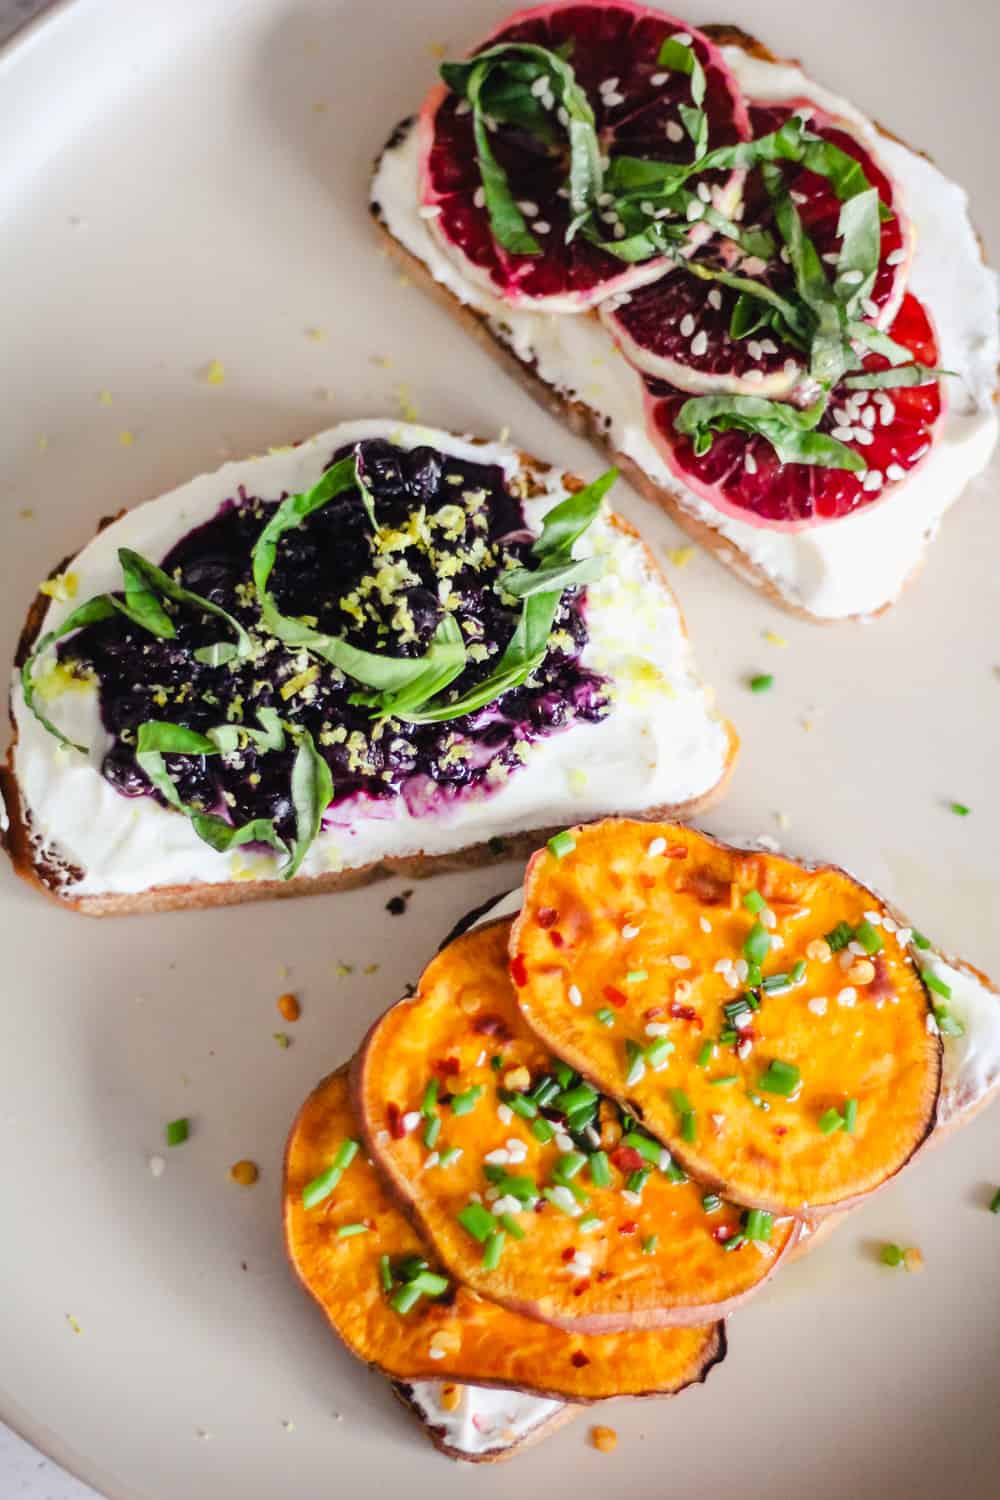 3 slices of toast topped with yogurt and sweet potato, wild blueberries, or blood oranges.